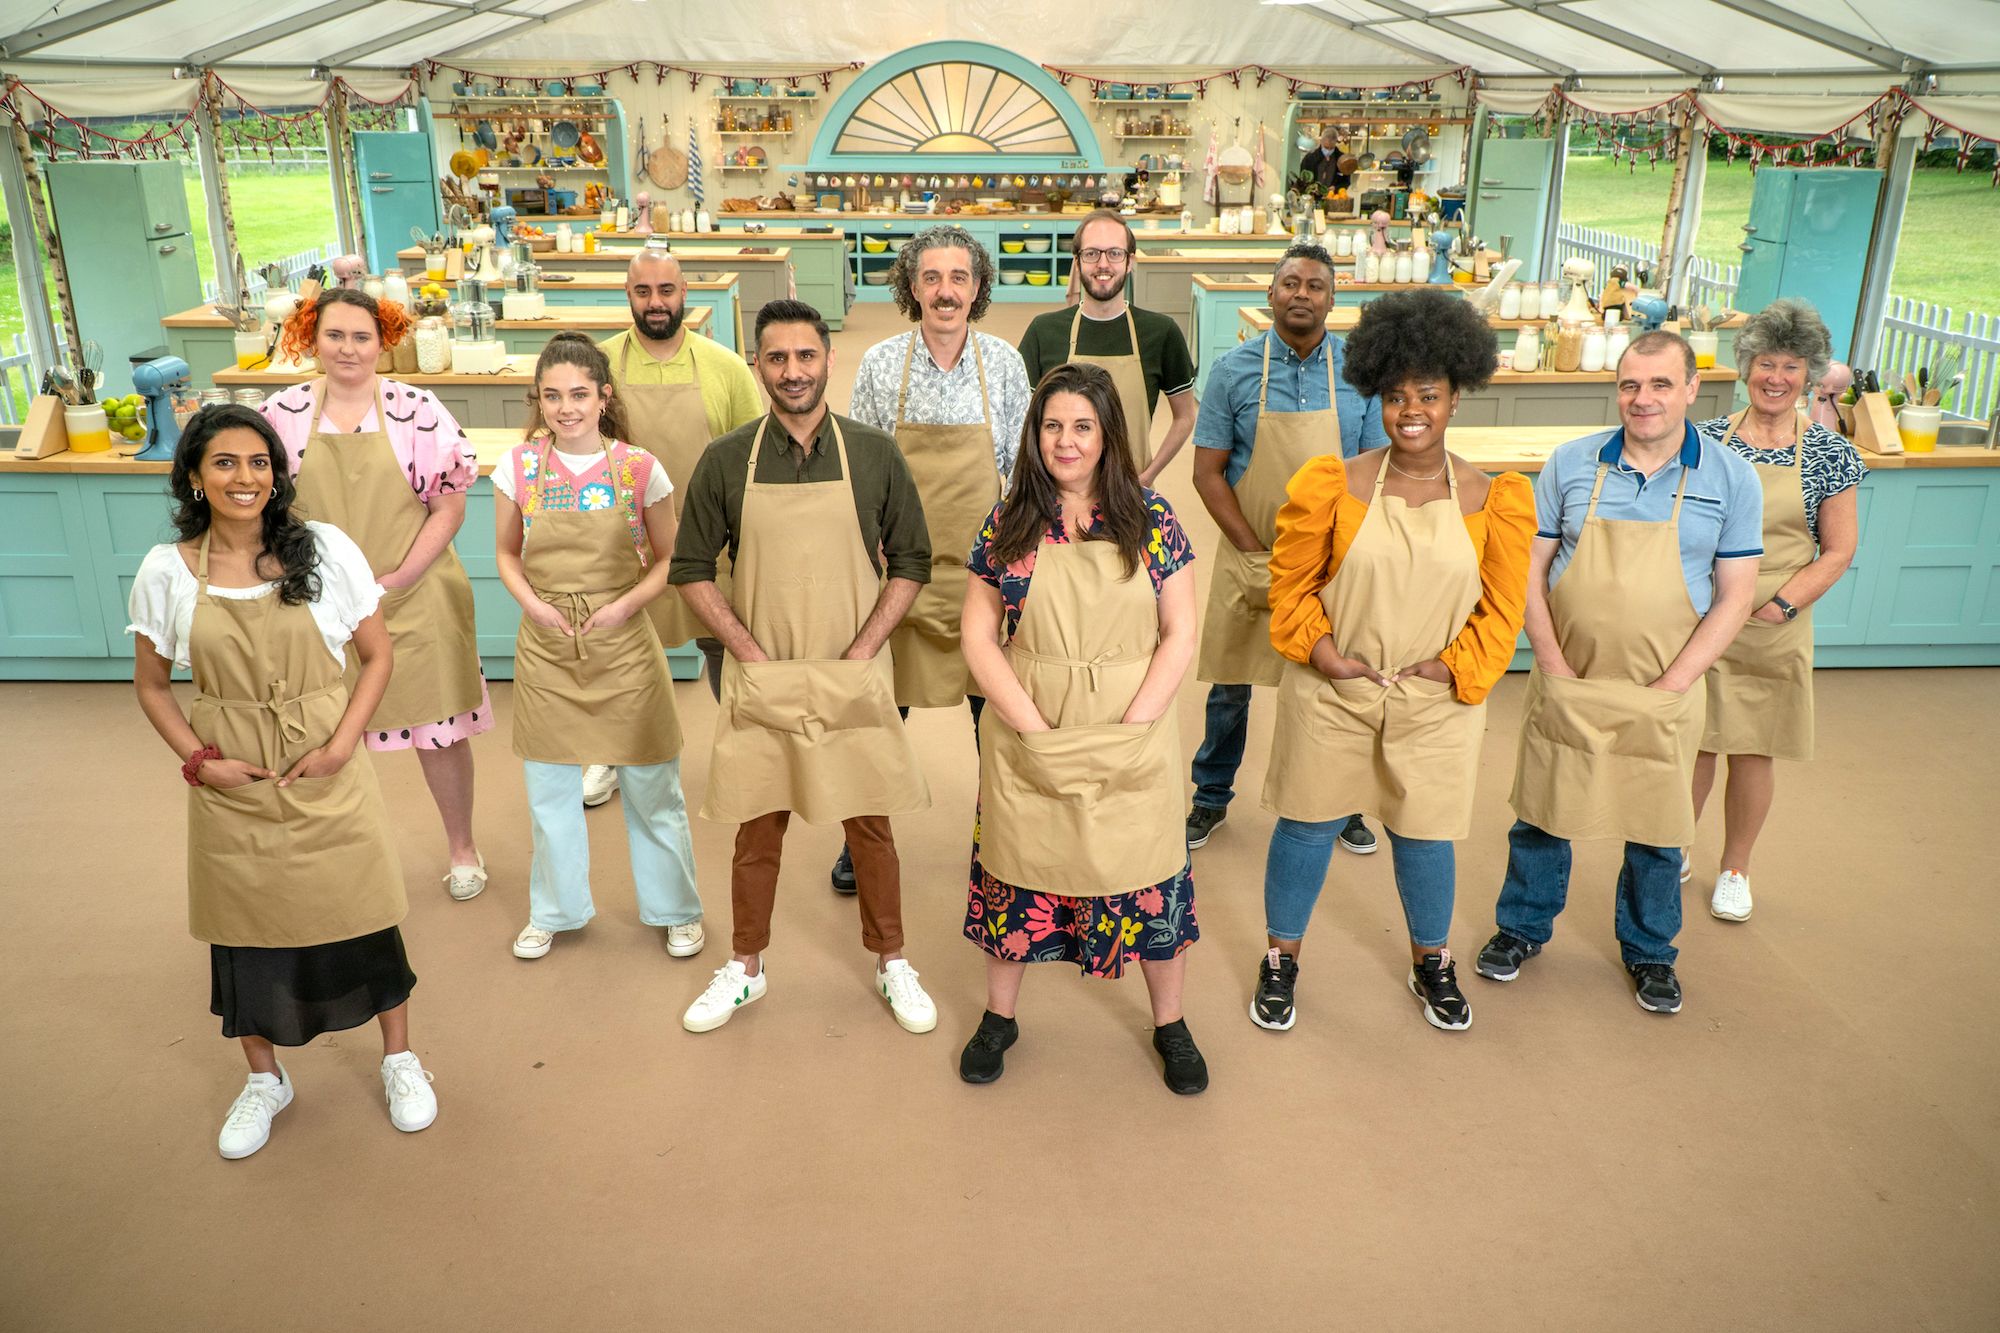 Meet the Cast of The Great British Baking Show image